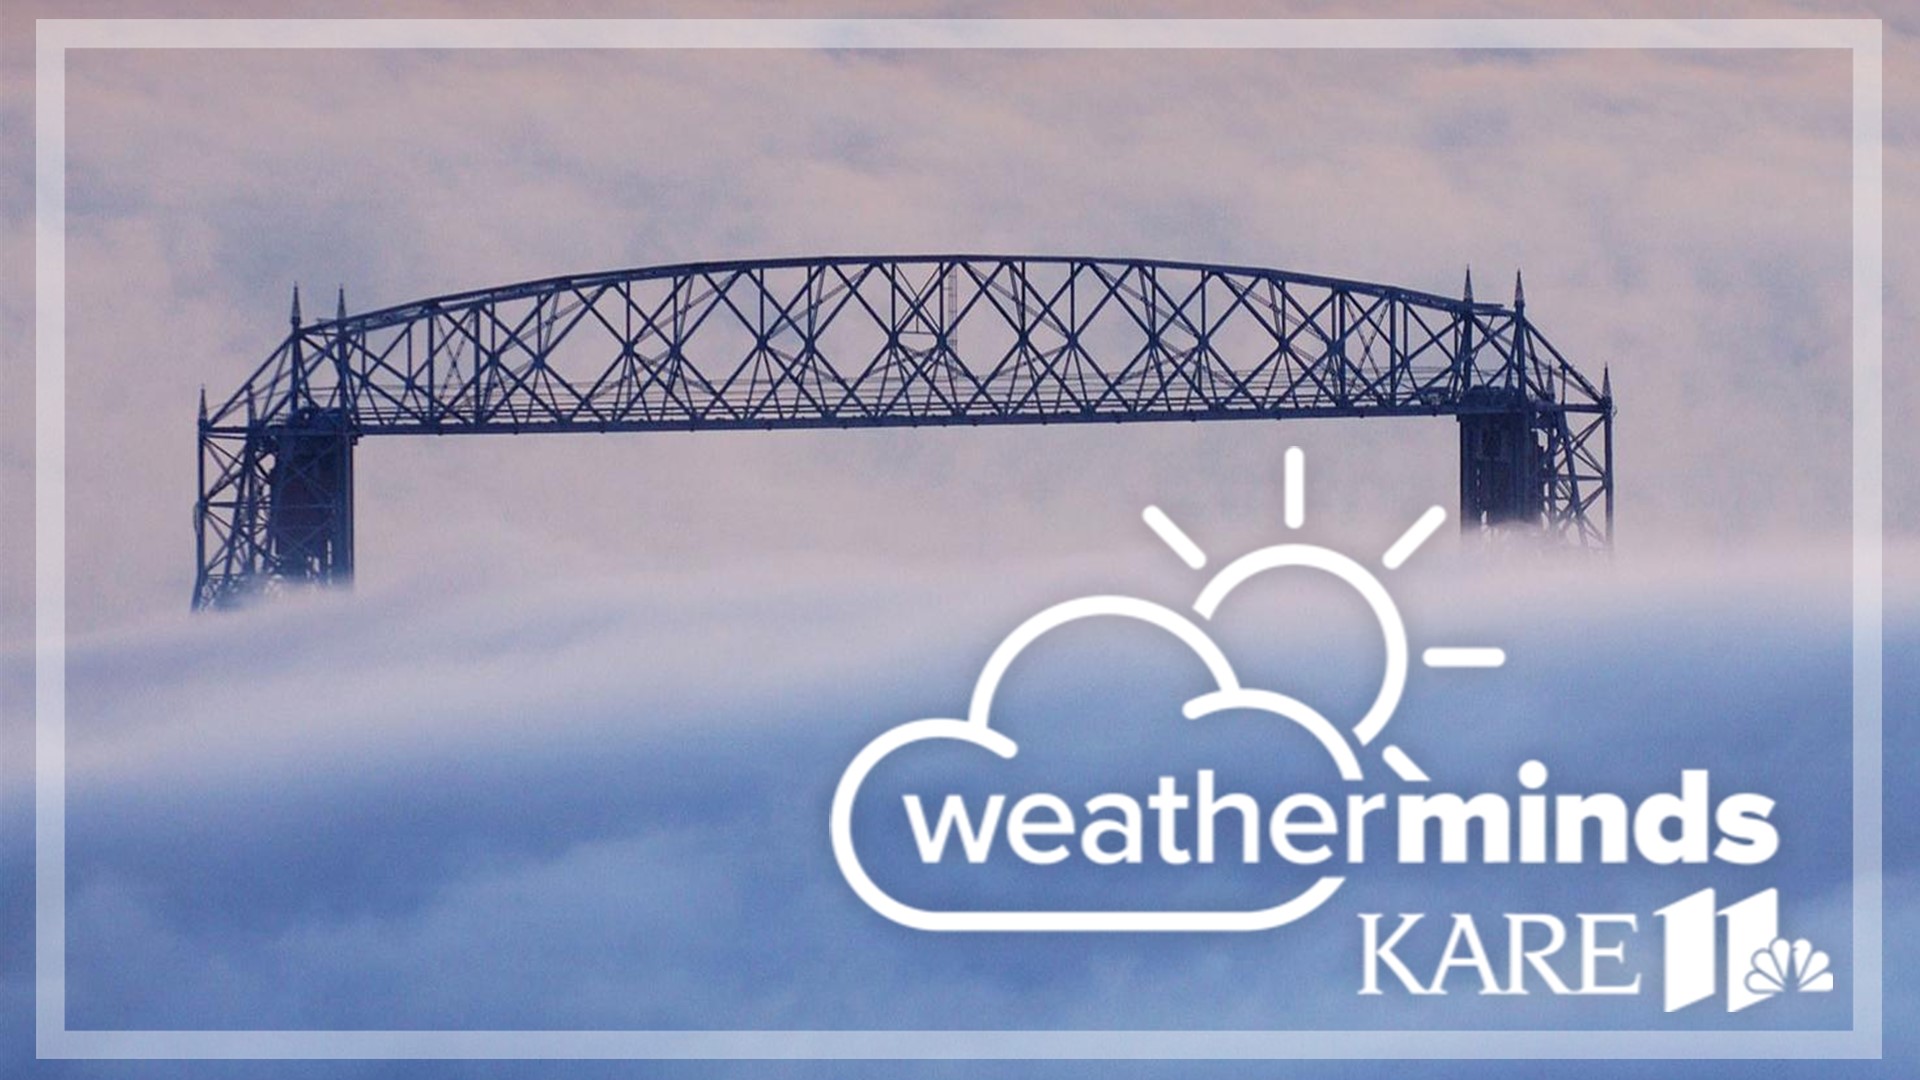 KARE 11 Meteorologist Ben Dery explains what lake effect clouds are and how they form over Lake Superior.